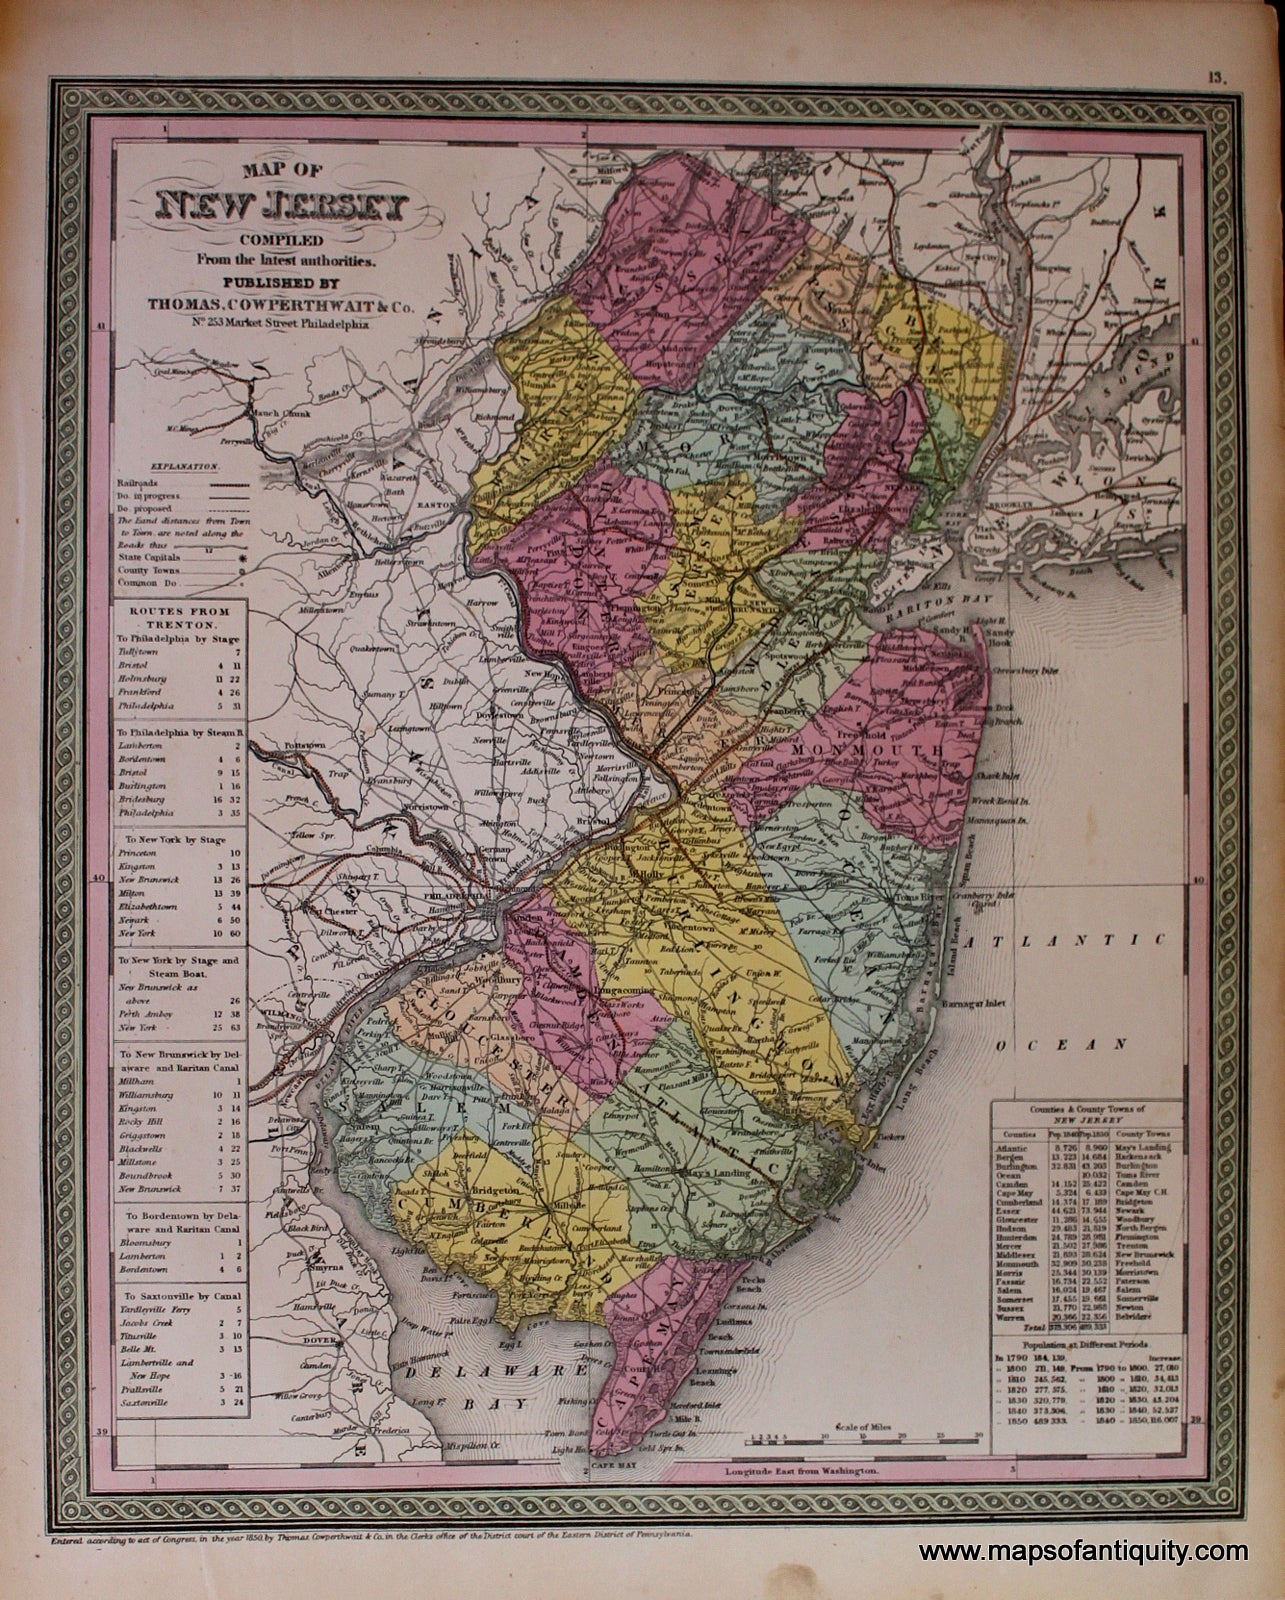 Antique-Hand-Colored-Map-Map-of-New-Jersey.-**********-United-States-Northeast-1850-Mitchell/Cowperthwait-Desilver-&-Butler-Maps-Of-Antiquity